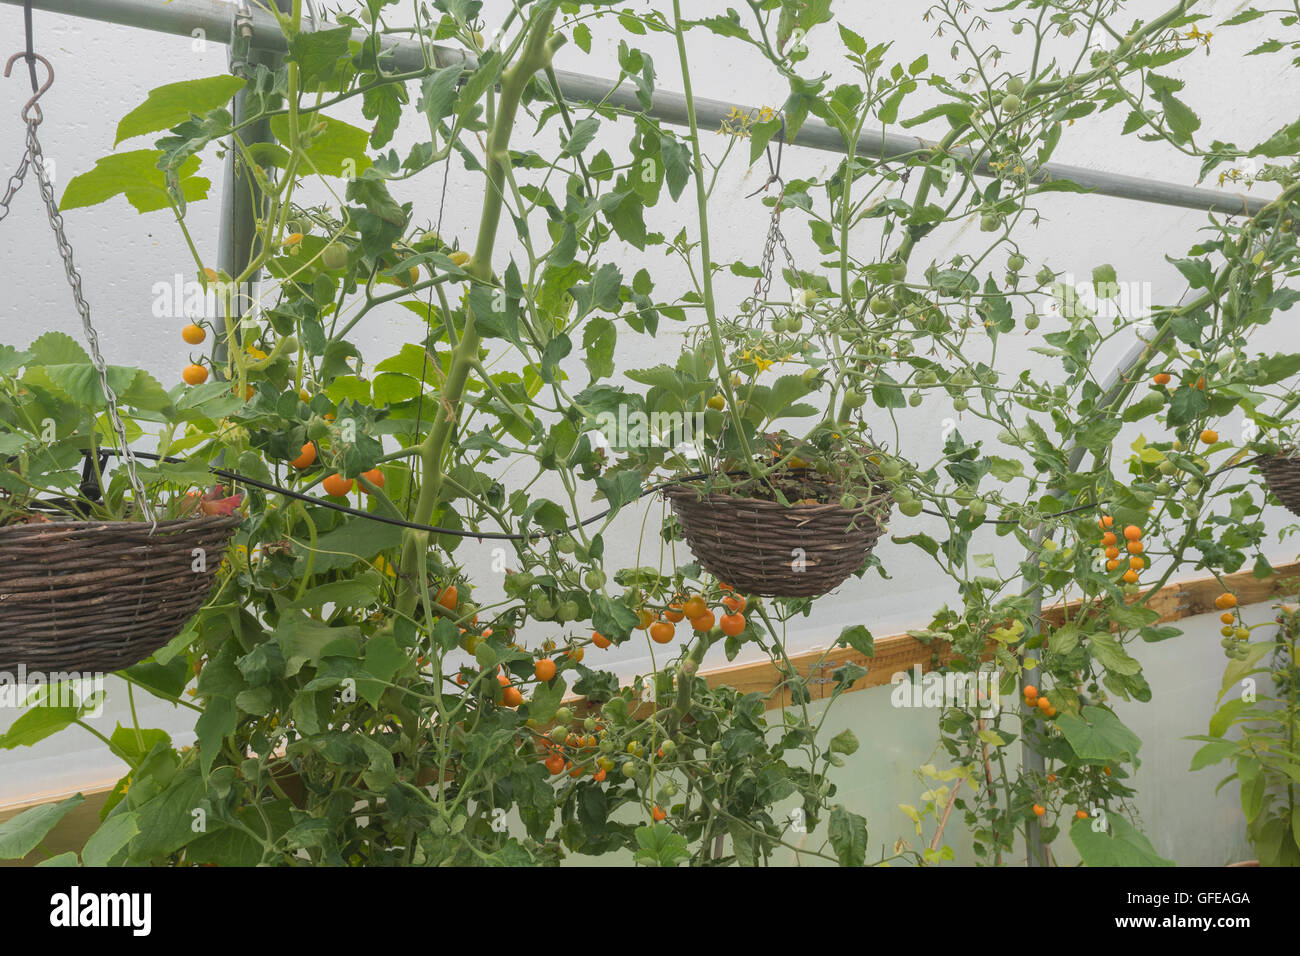 Tomato vines (with watering system) being grown in a polytunnel - metaphor for 'growing / grow your own', being self-sufficient & self-reliant. Stock Photo